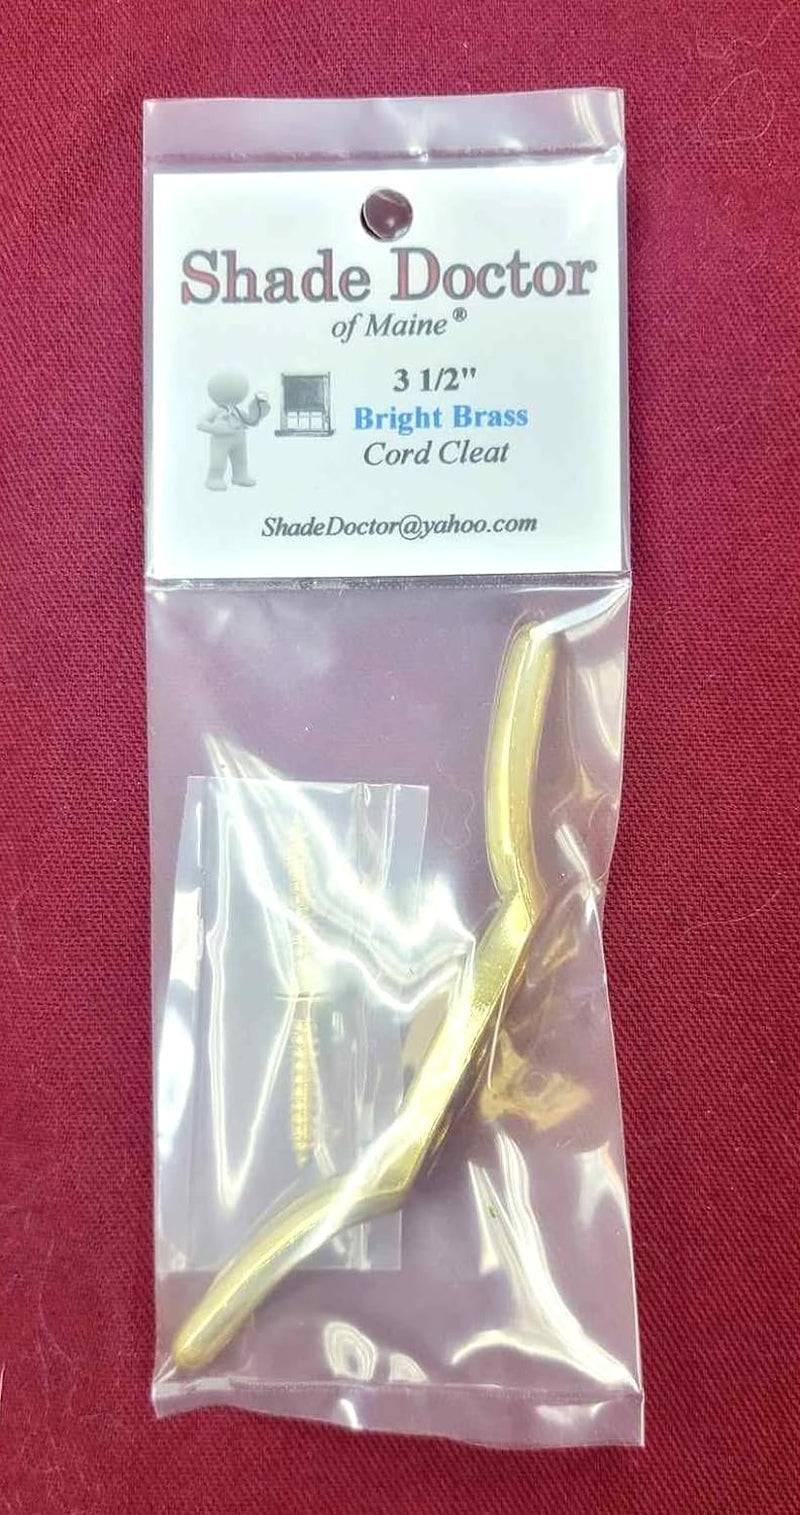 3 1/2" Bright Brass Cord Cleat for Woven Woods, Roman and Pleated Shades